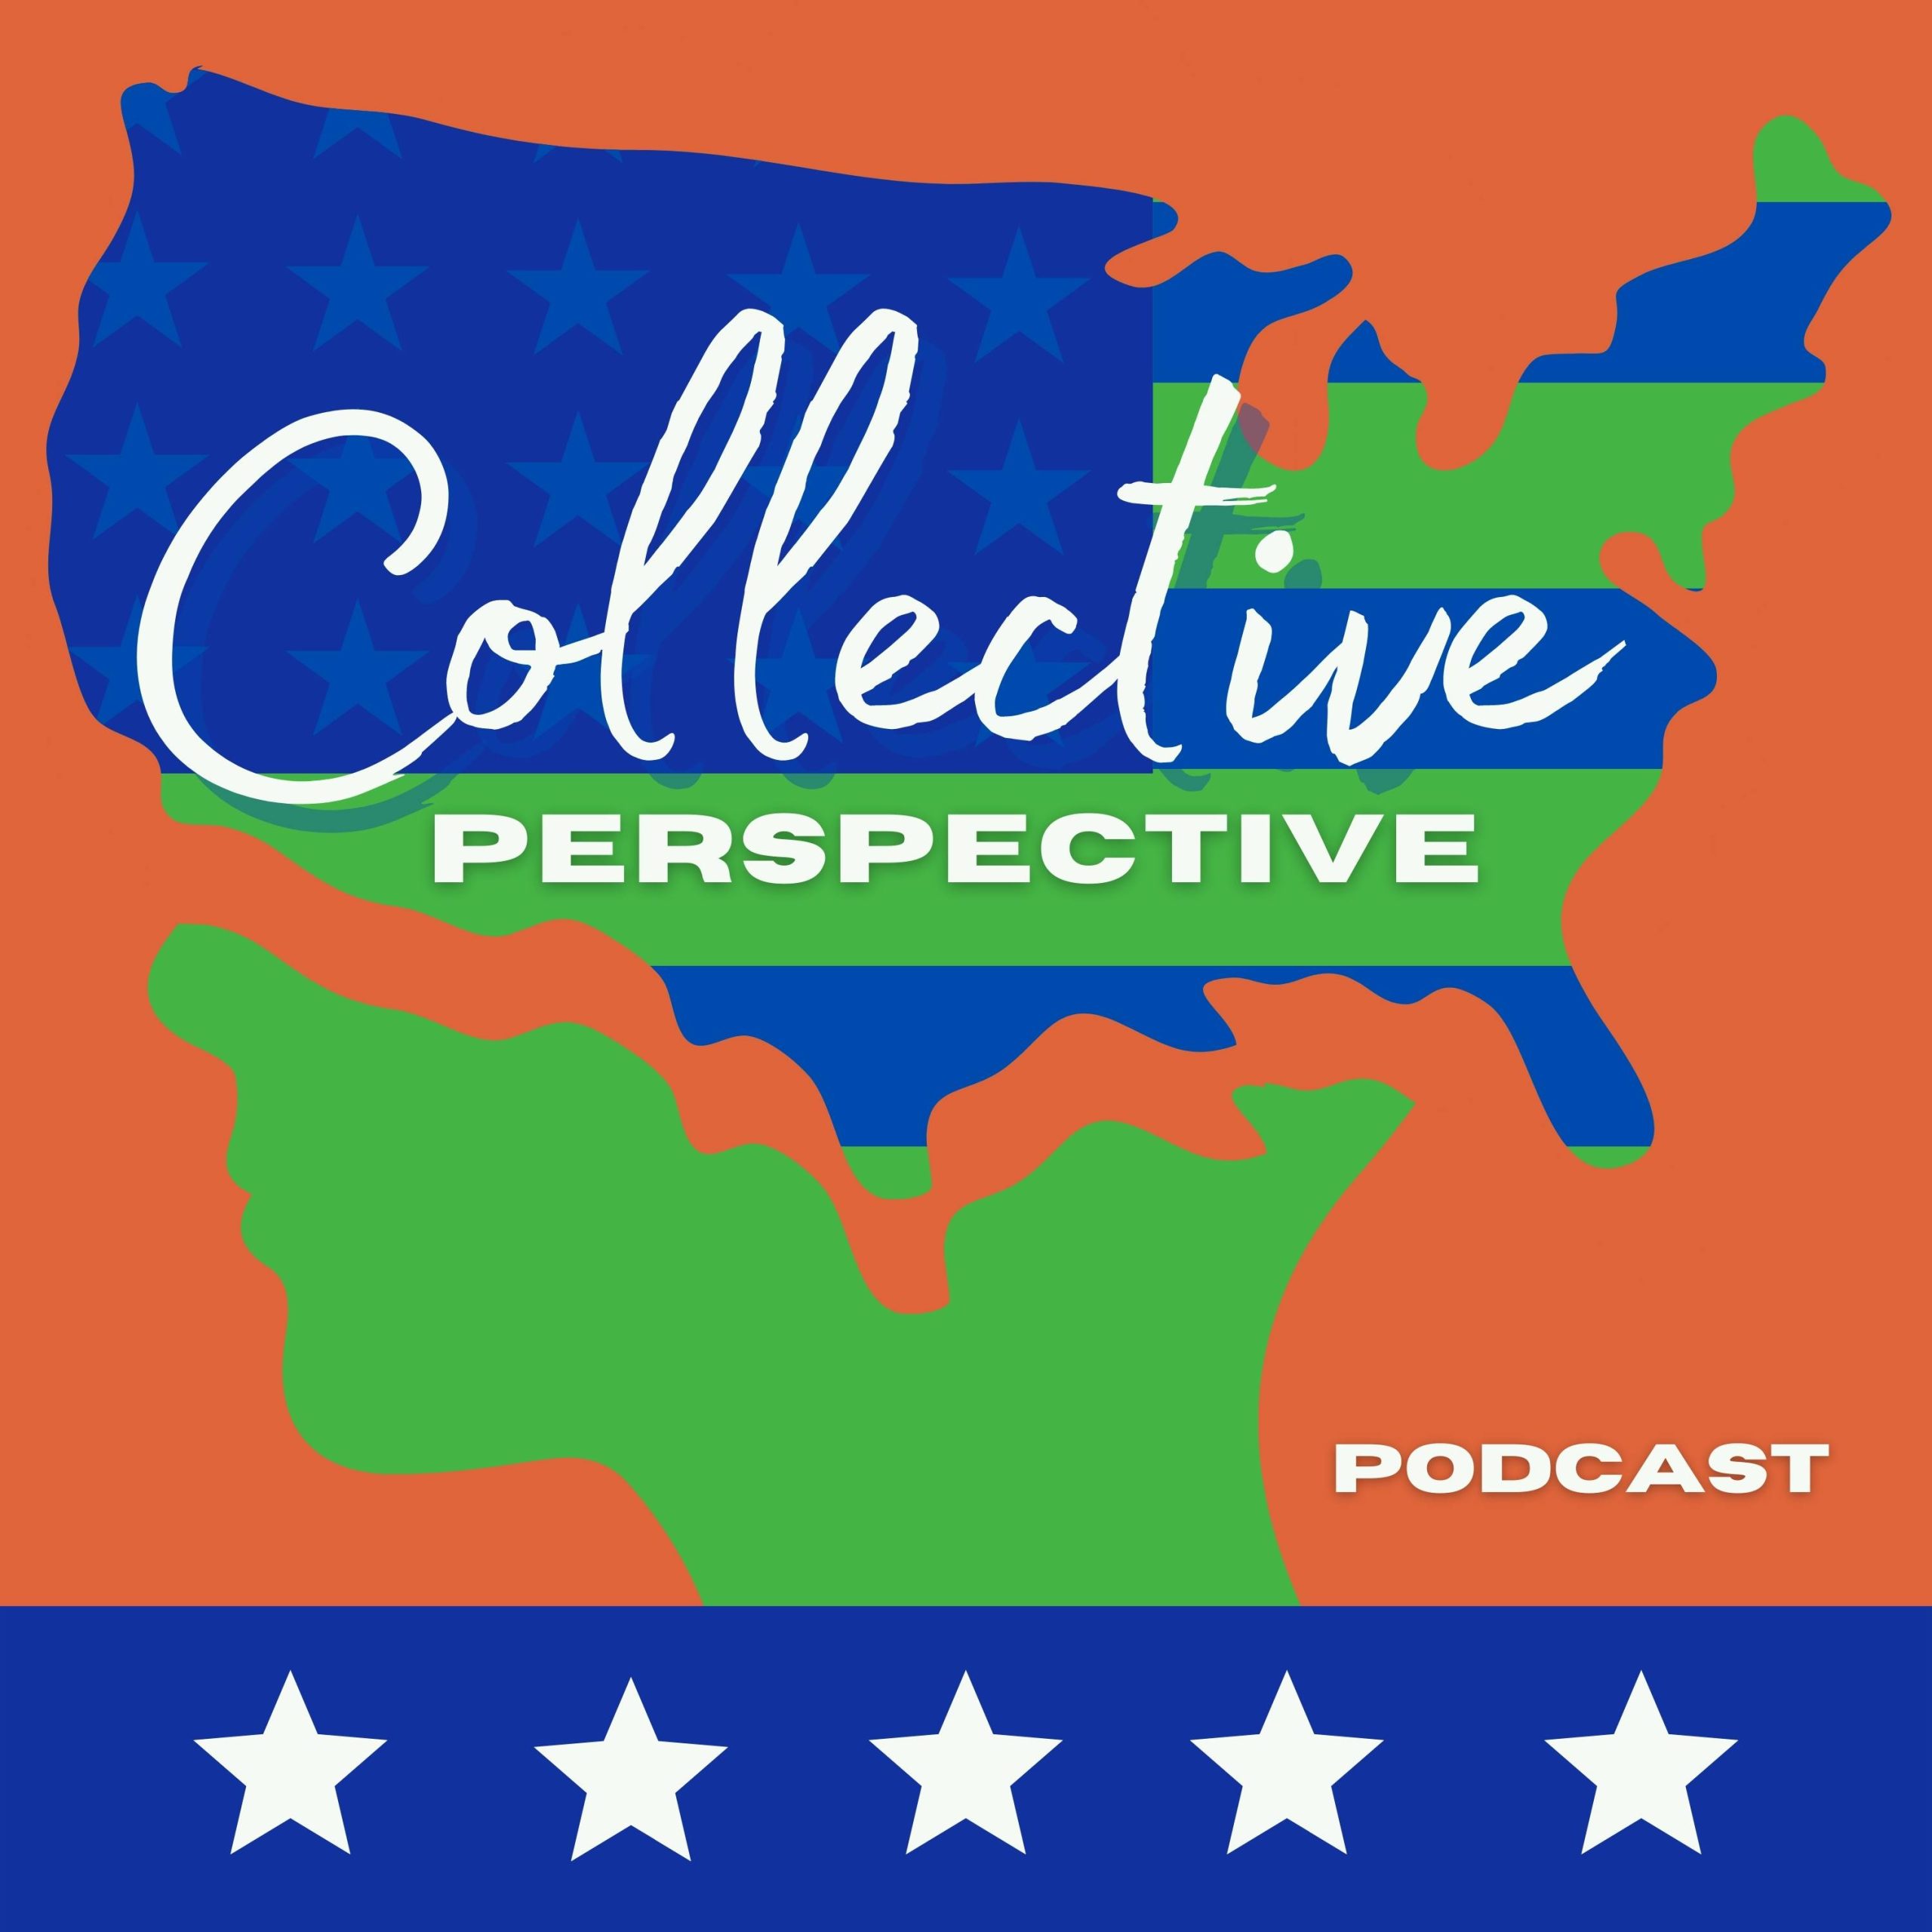 Collective Perspective Podcast